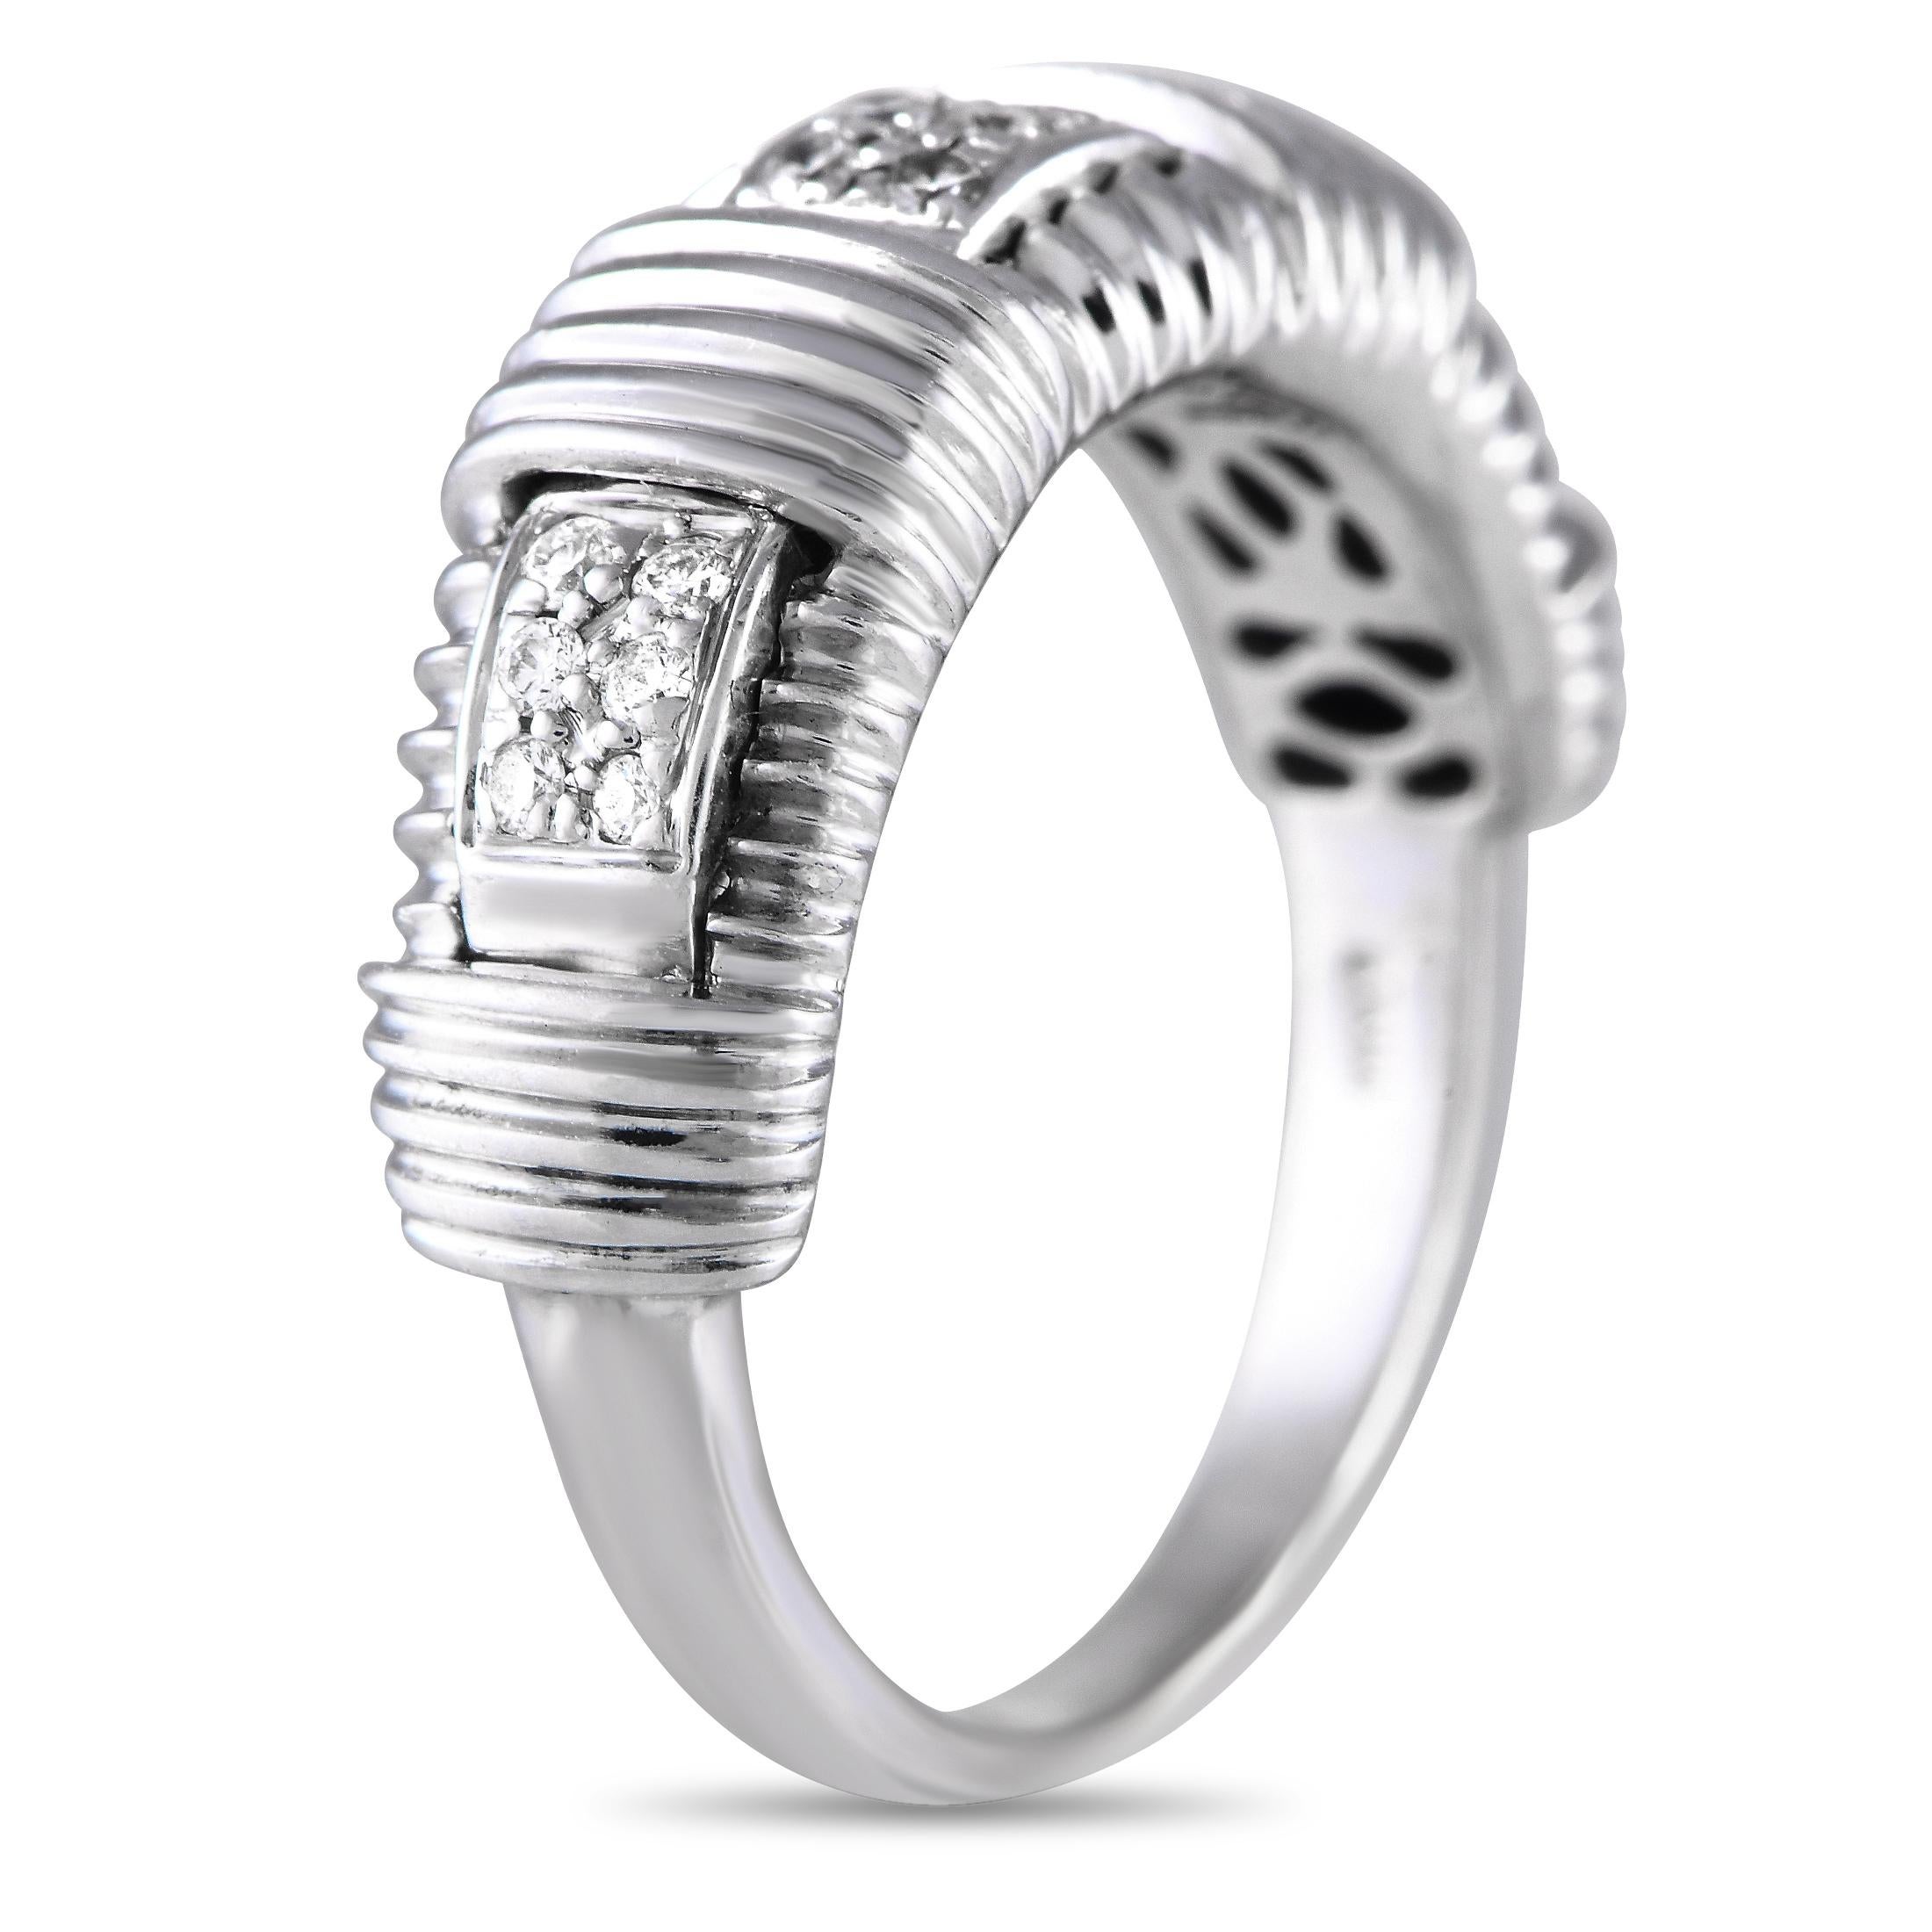 Edgy and elegant at the same time, this Roberto Coin ring in 18K white gold makes a stylish addition to any wardrobe. The tapering band features a wider top with a ridged or grooved profile. Three rectangular bezels filled with petite diamonds bring